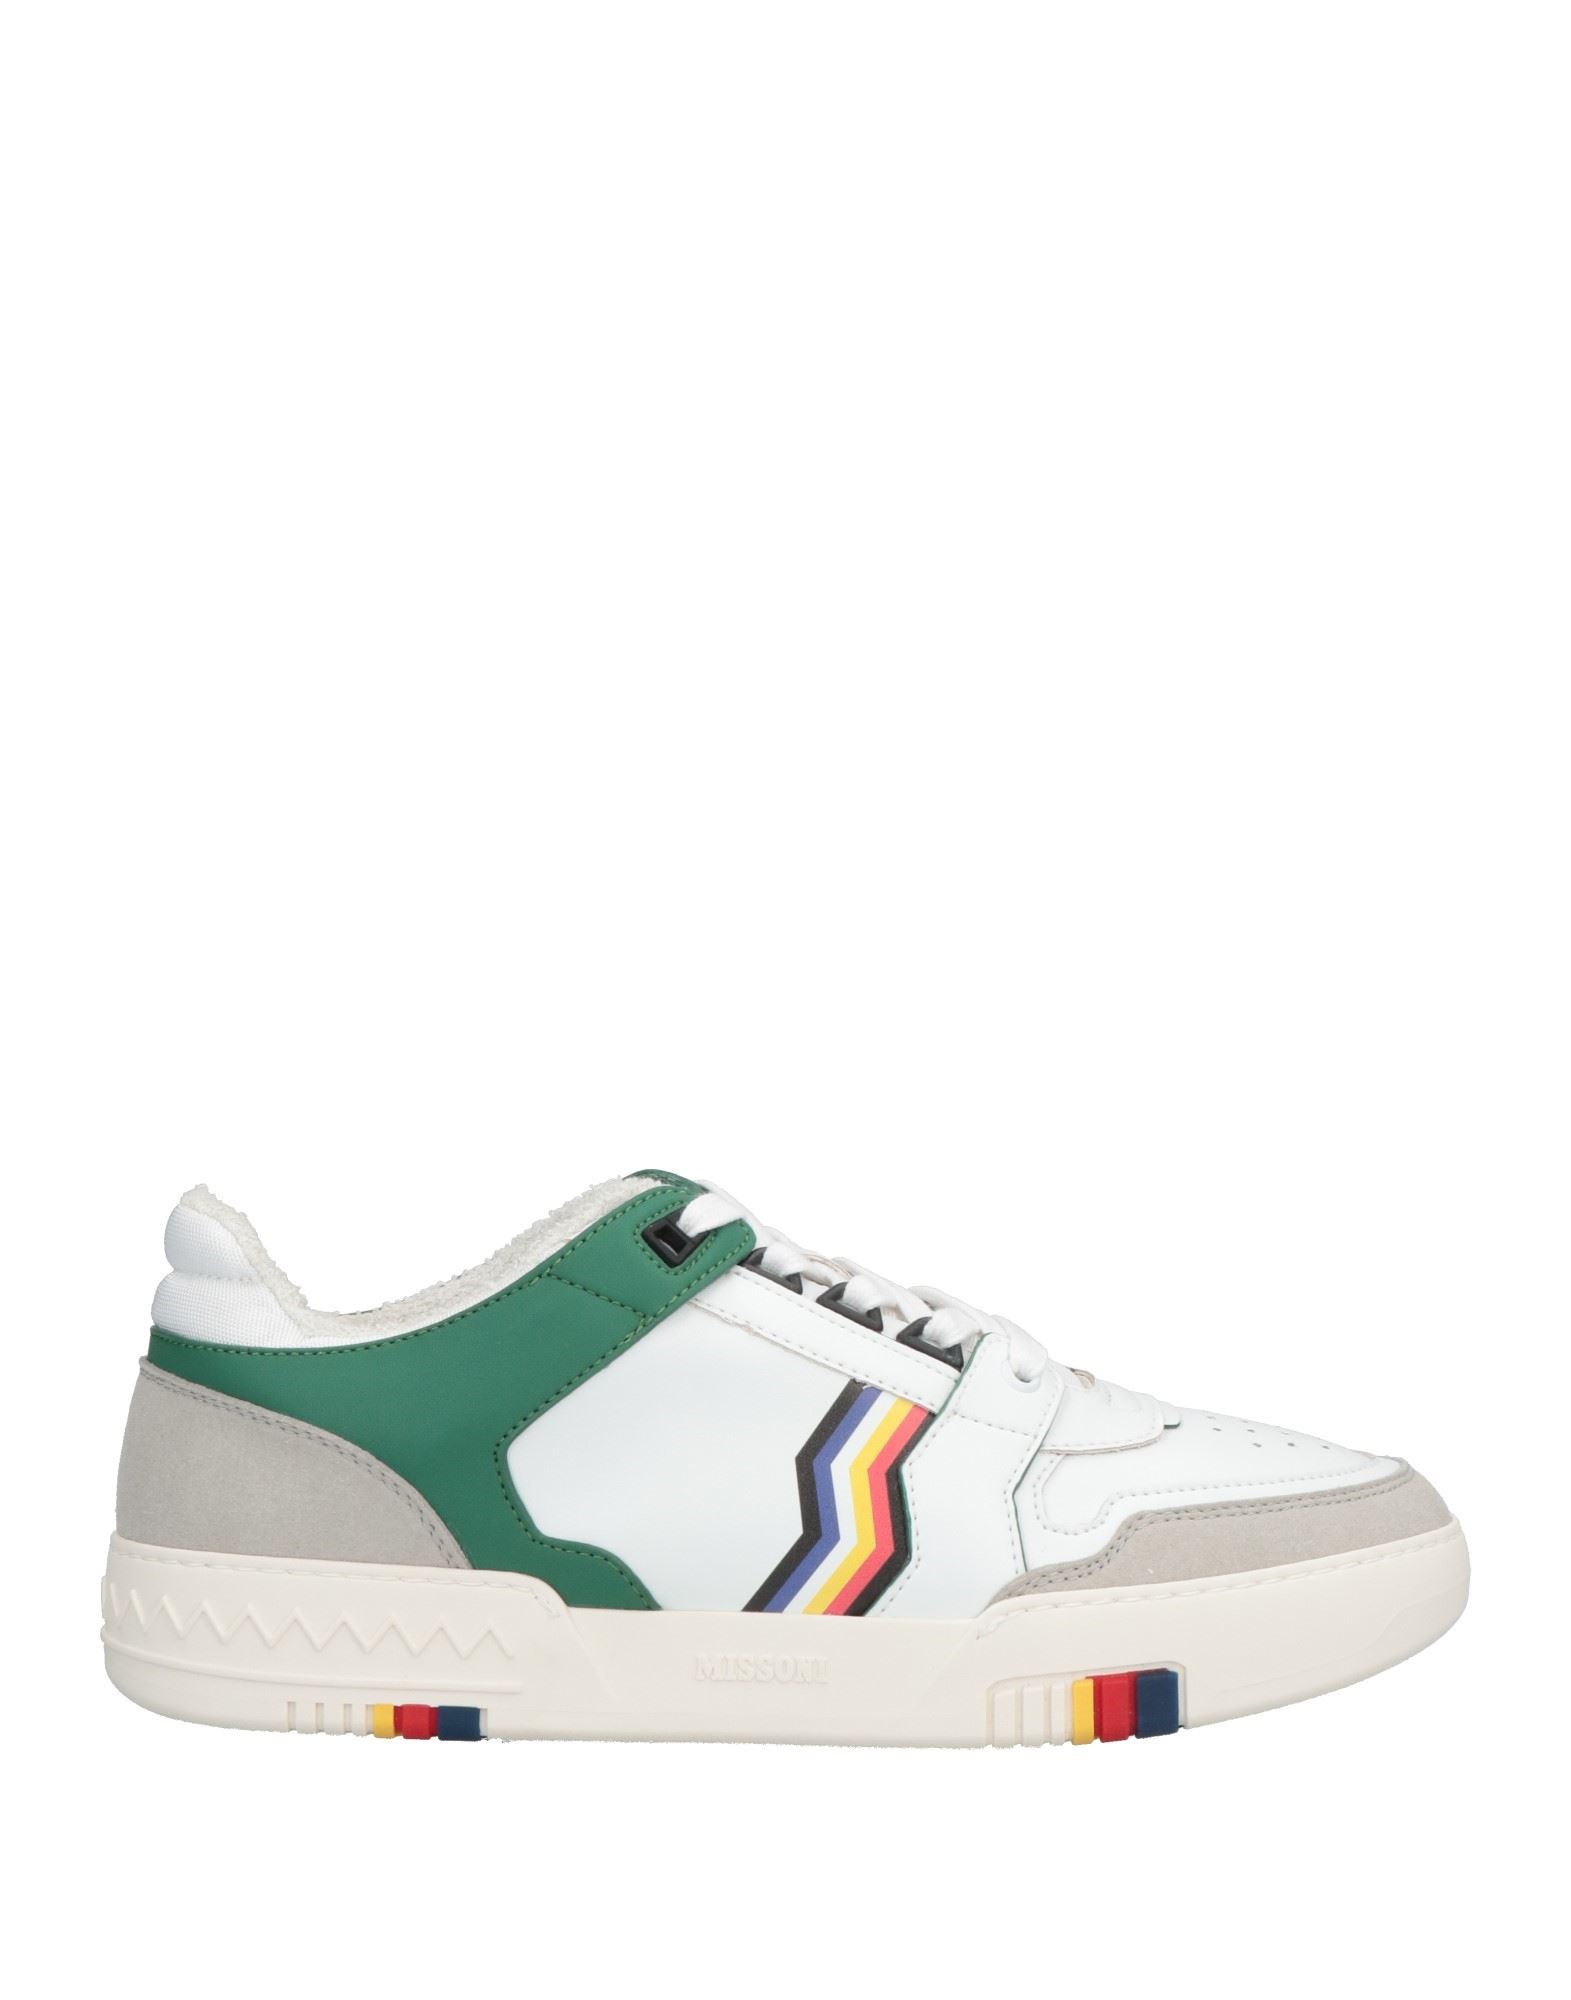 Acbc X Missoni Sneakers In Green